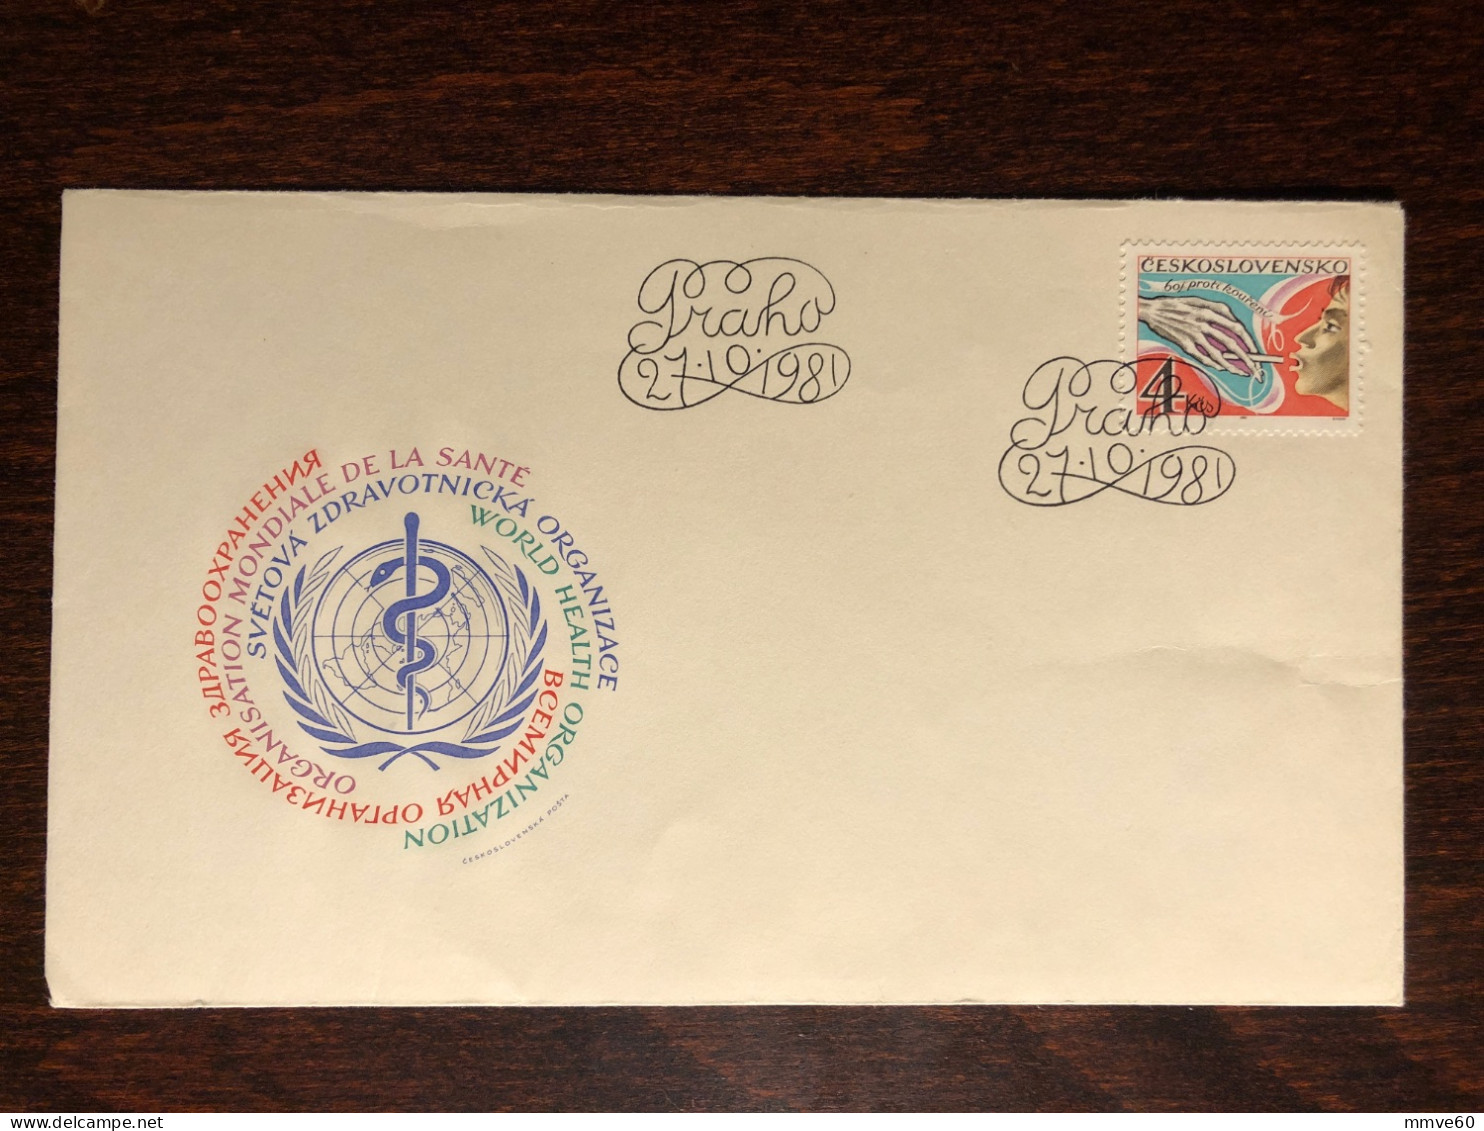 CZECHOSLOVAKIA FDC COVER 1981 YEAR SMOKING TOBACCO HEALTH MEDICINE STAMPS - FDC